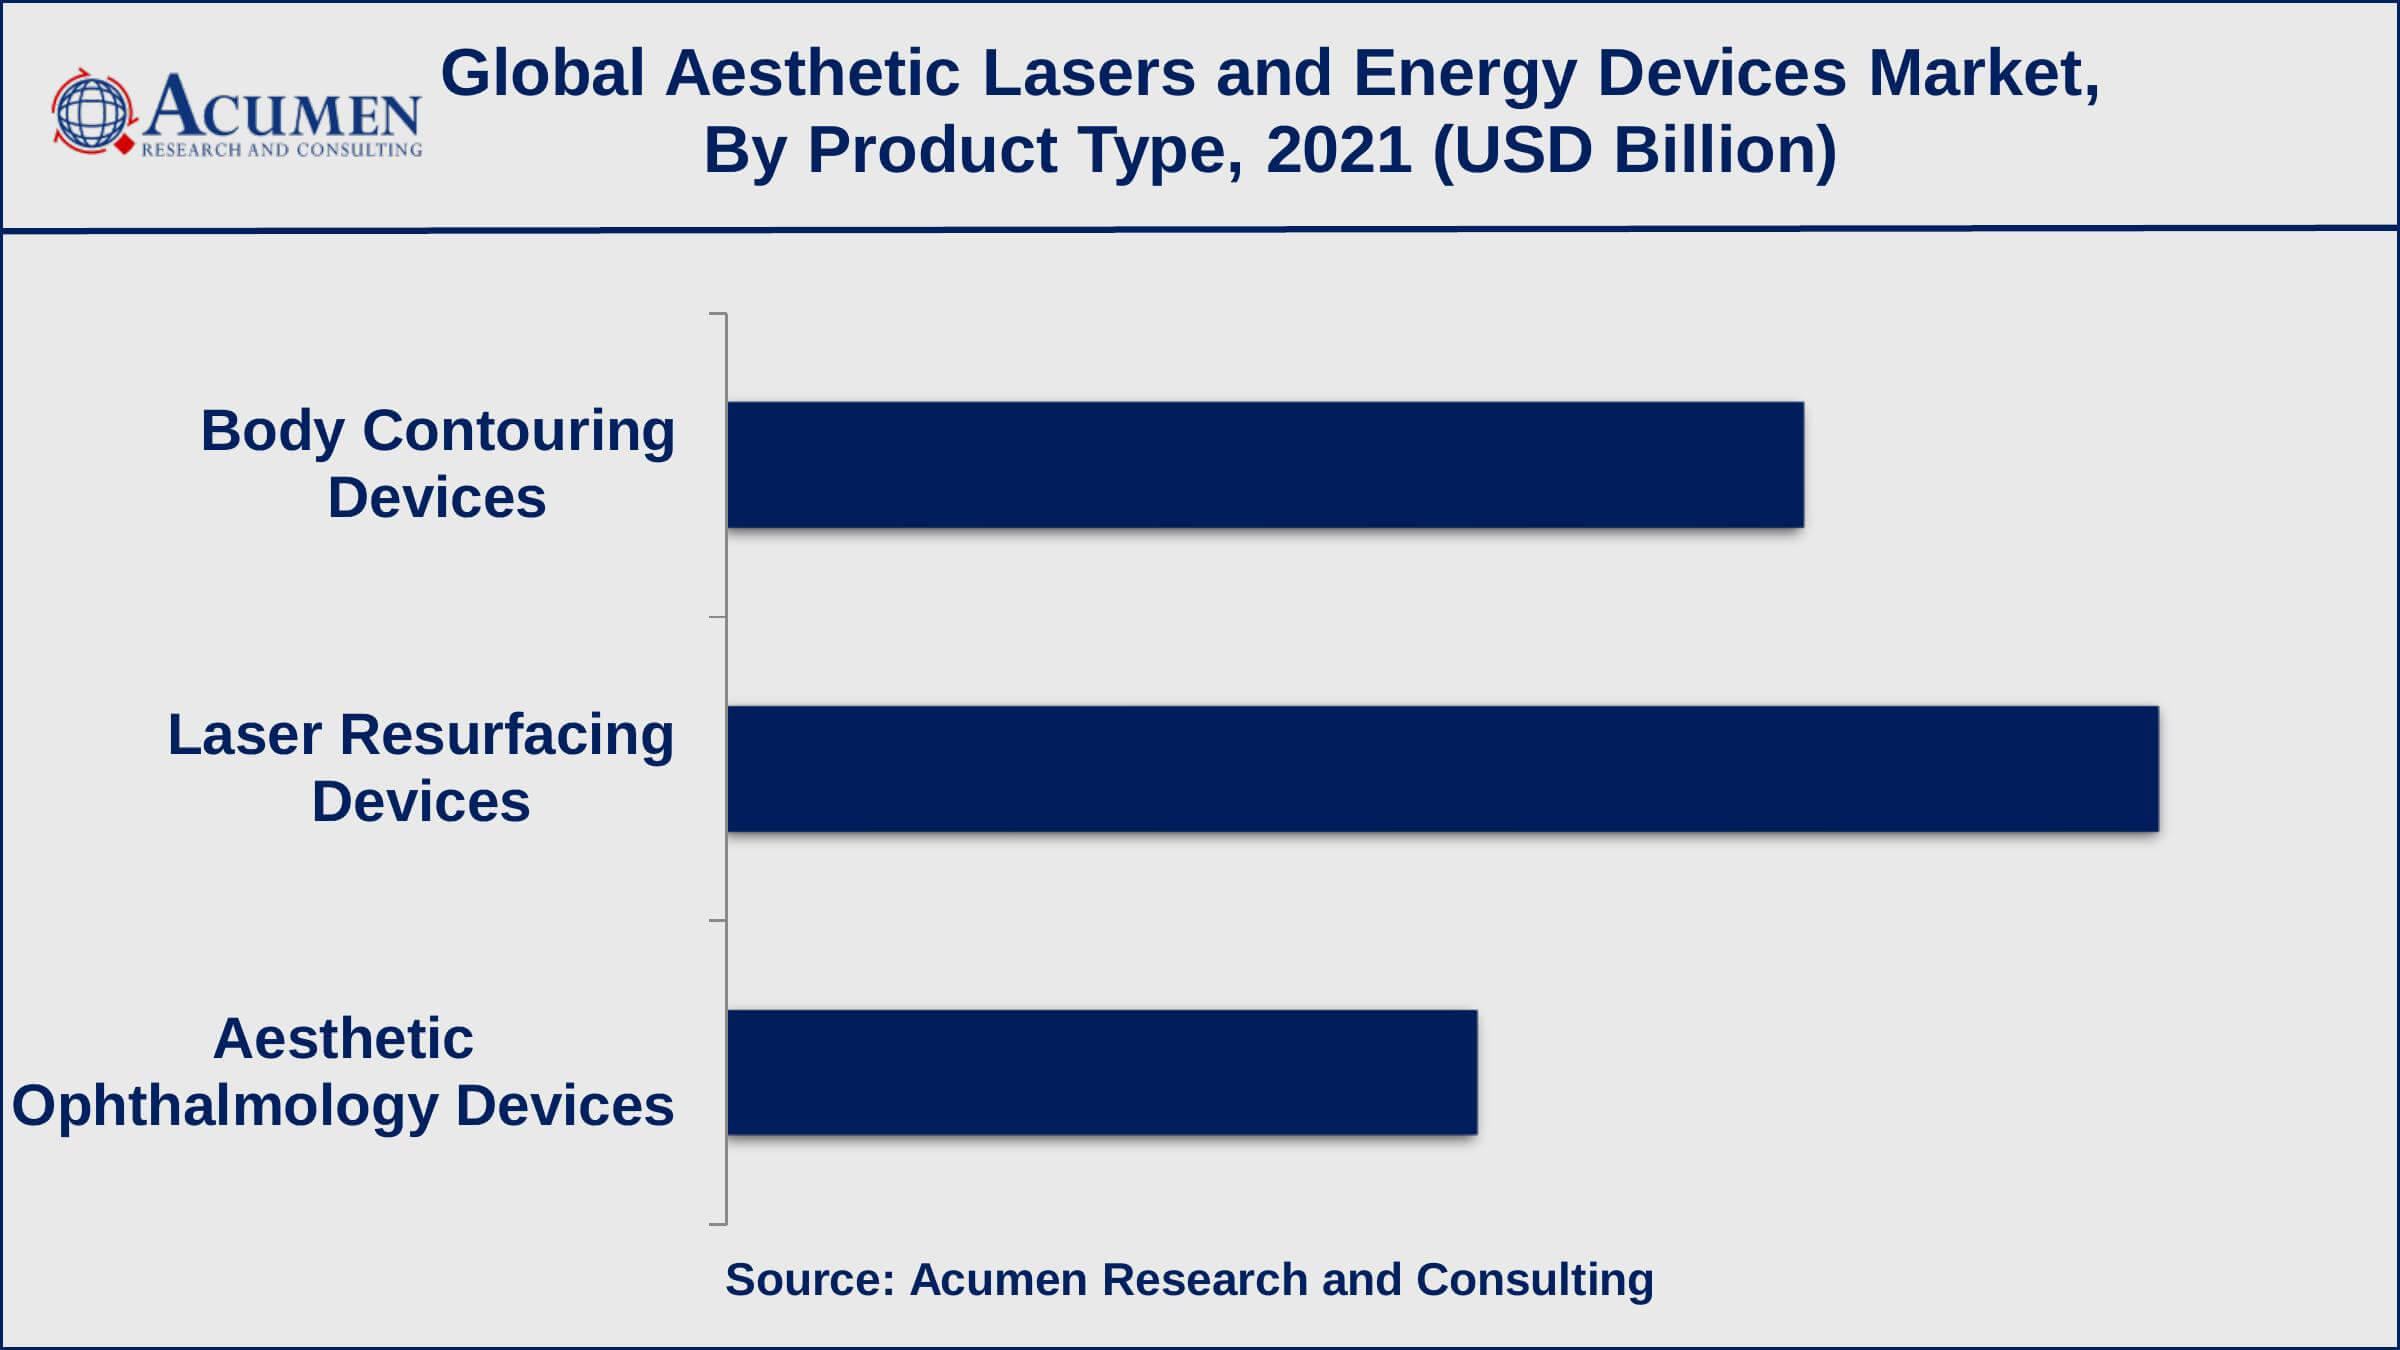 Based on product type, laser resurfacing devices recorded over 44% of the overall market share in 2021